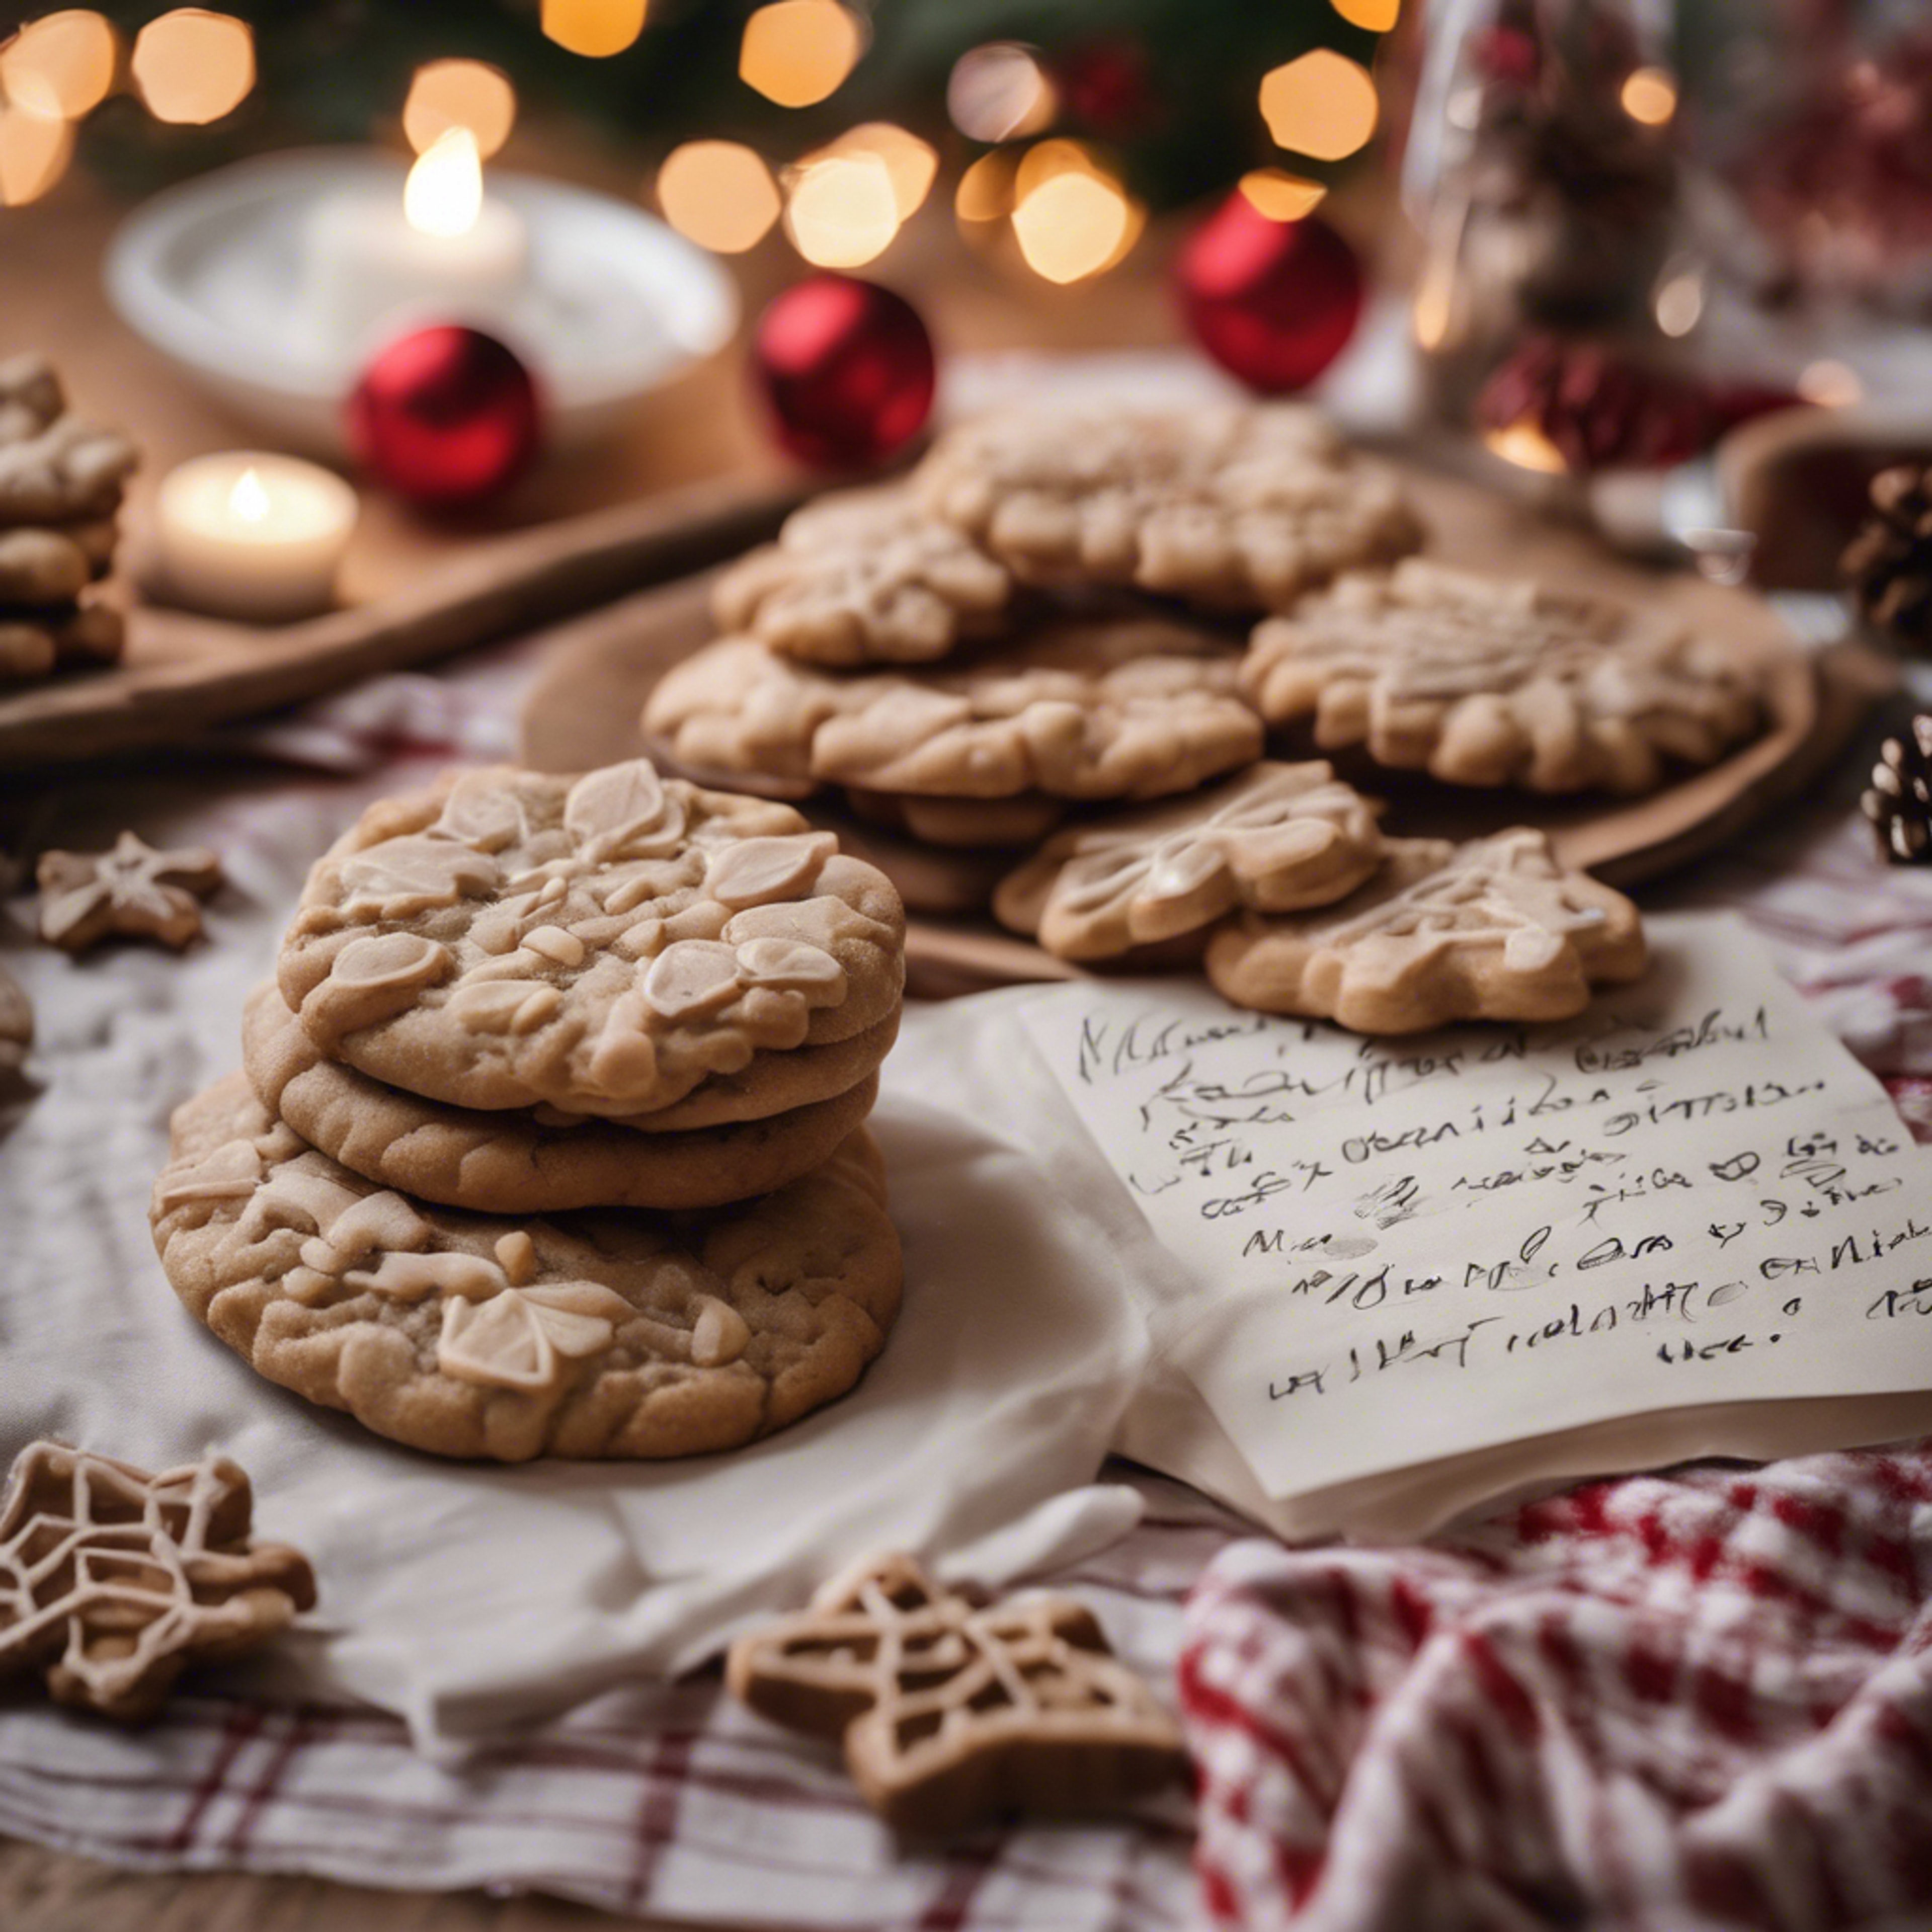 A spread of cozy, homemade Christmas cookies on a festive tablecloth, a glass of milk, and a note to Santa. Tapet[2a748ec29b0a47b6b2f7]